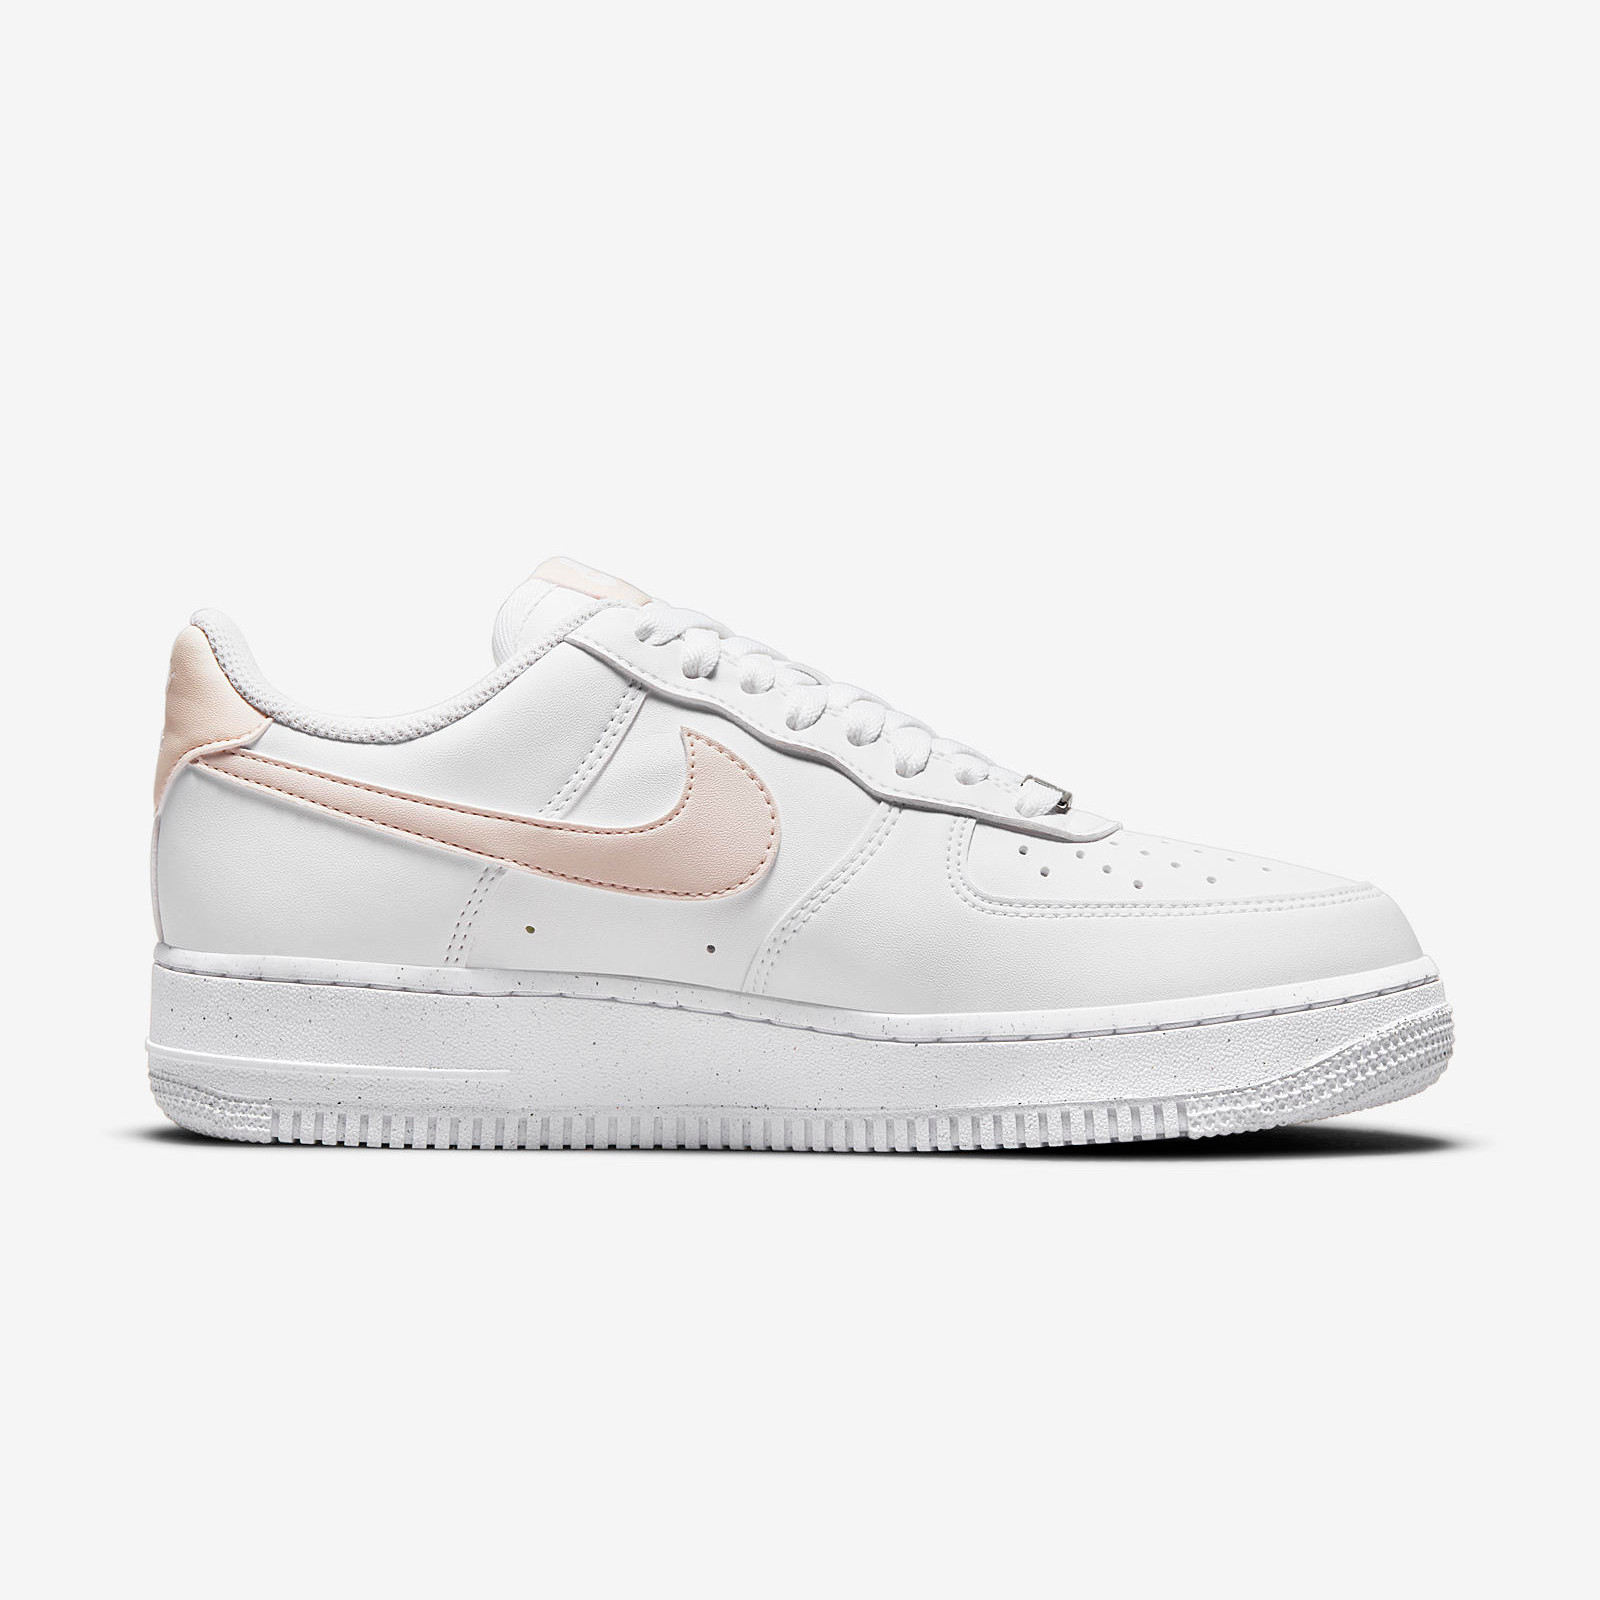 Nike Air Force 1
Next Nature
White / Pale Coral